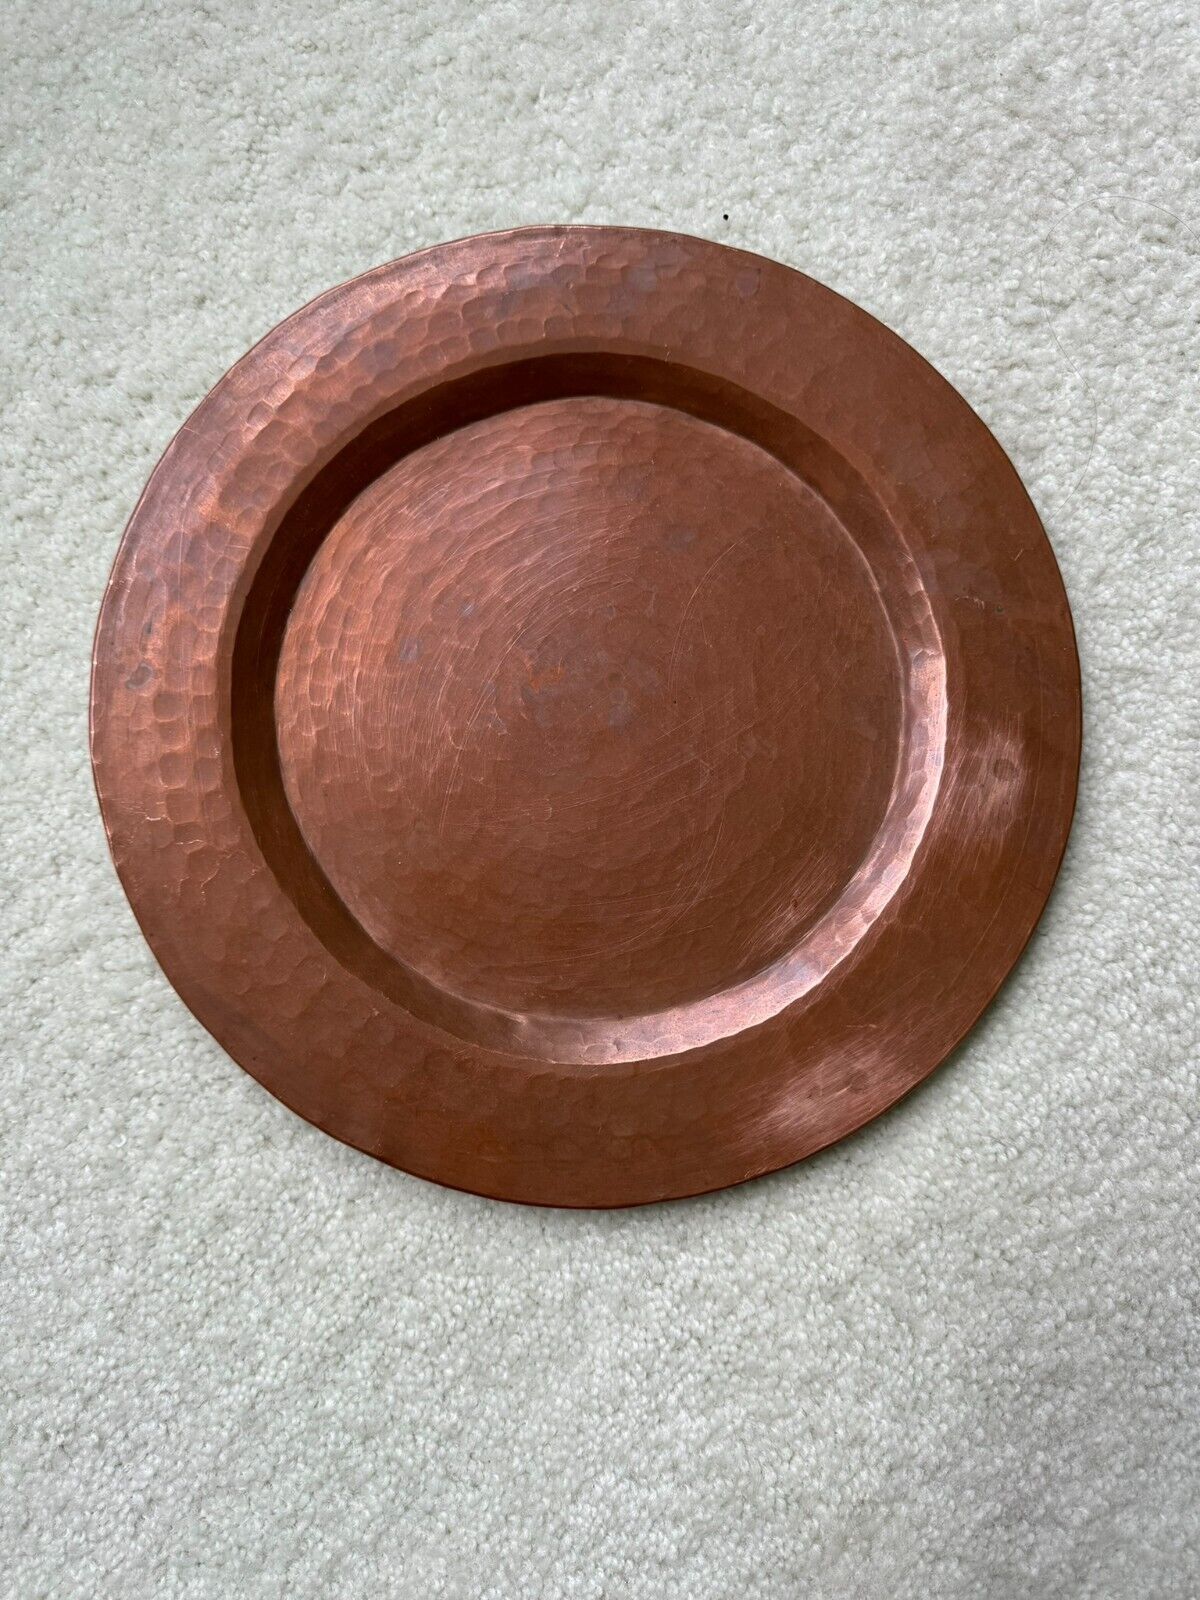 Vintage 1950s Hammered Copper plate Serving Tray Dish Low Bowl Platter 12\